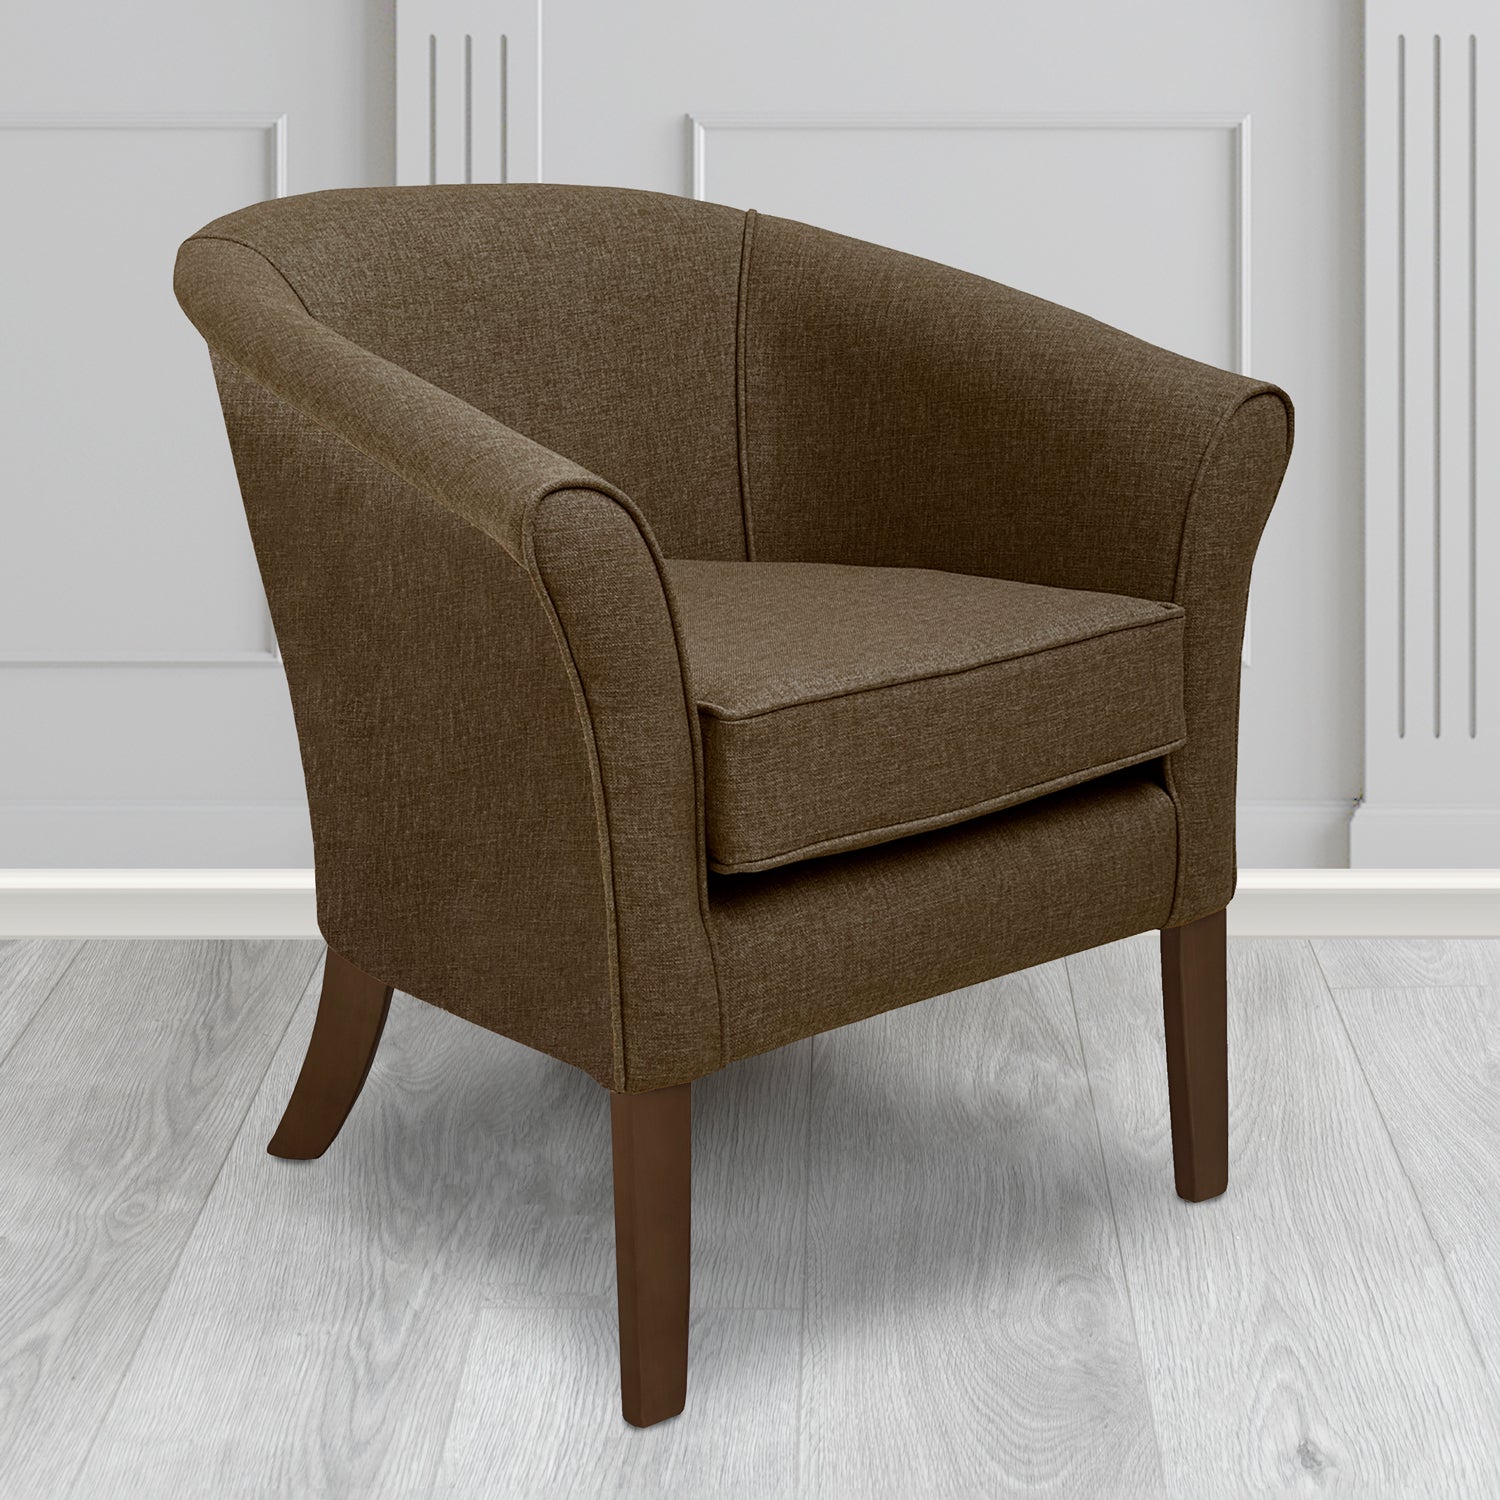 Aspen Tub Chair in Marna 814 Espresso Crib 5 Fabric - Antimicrobial, Stain Resistant & Waterproof - The Tub Chair Shop